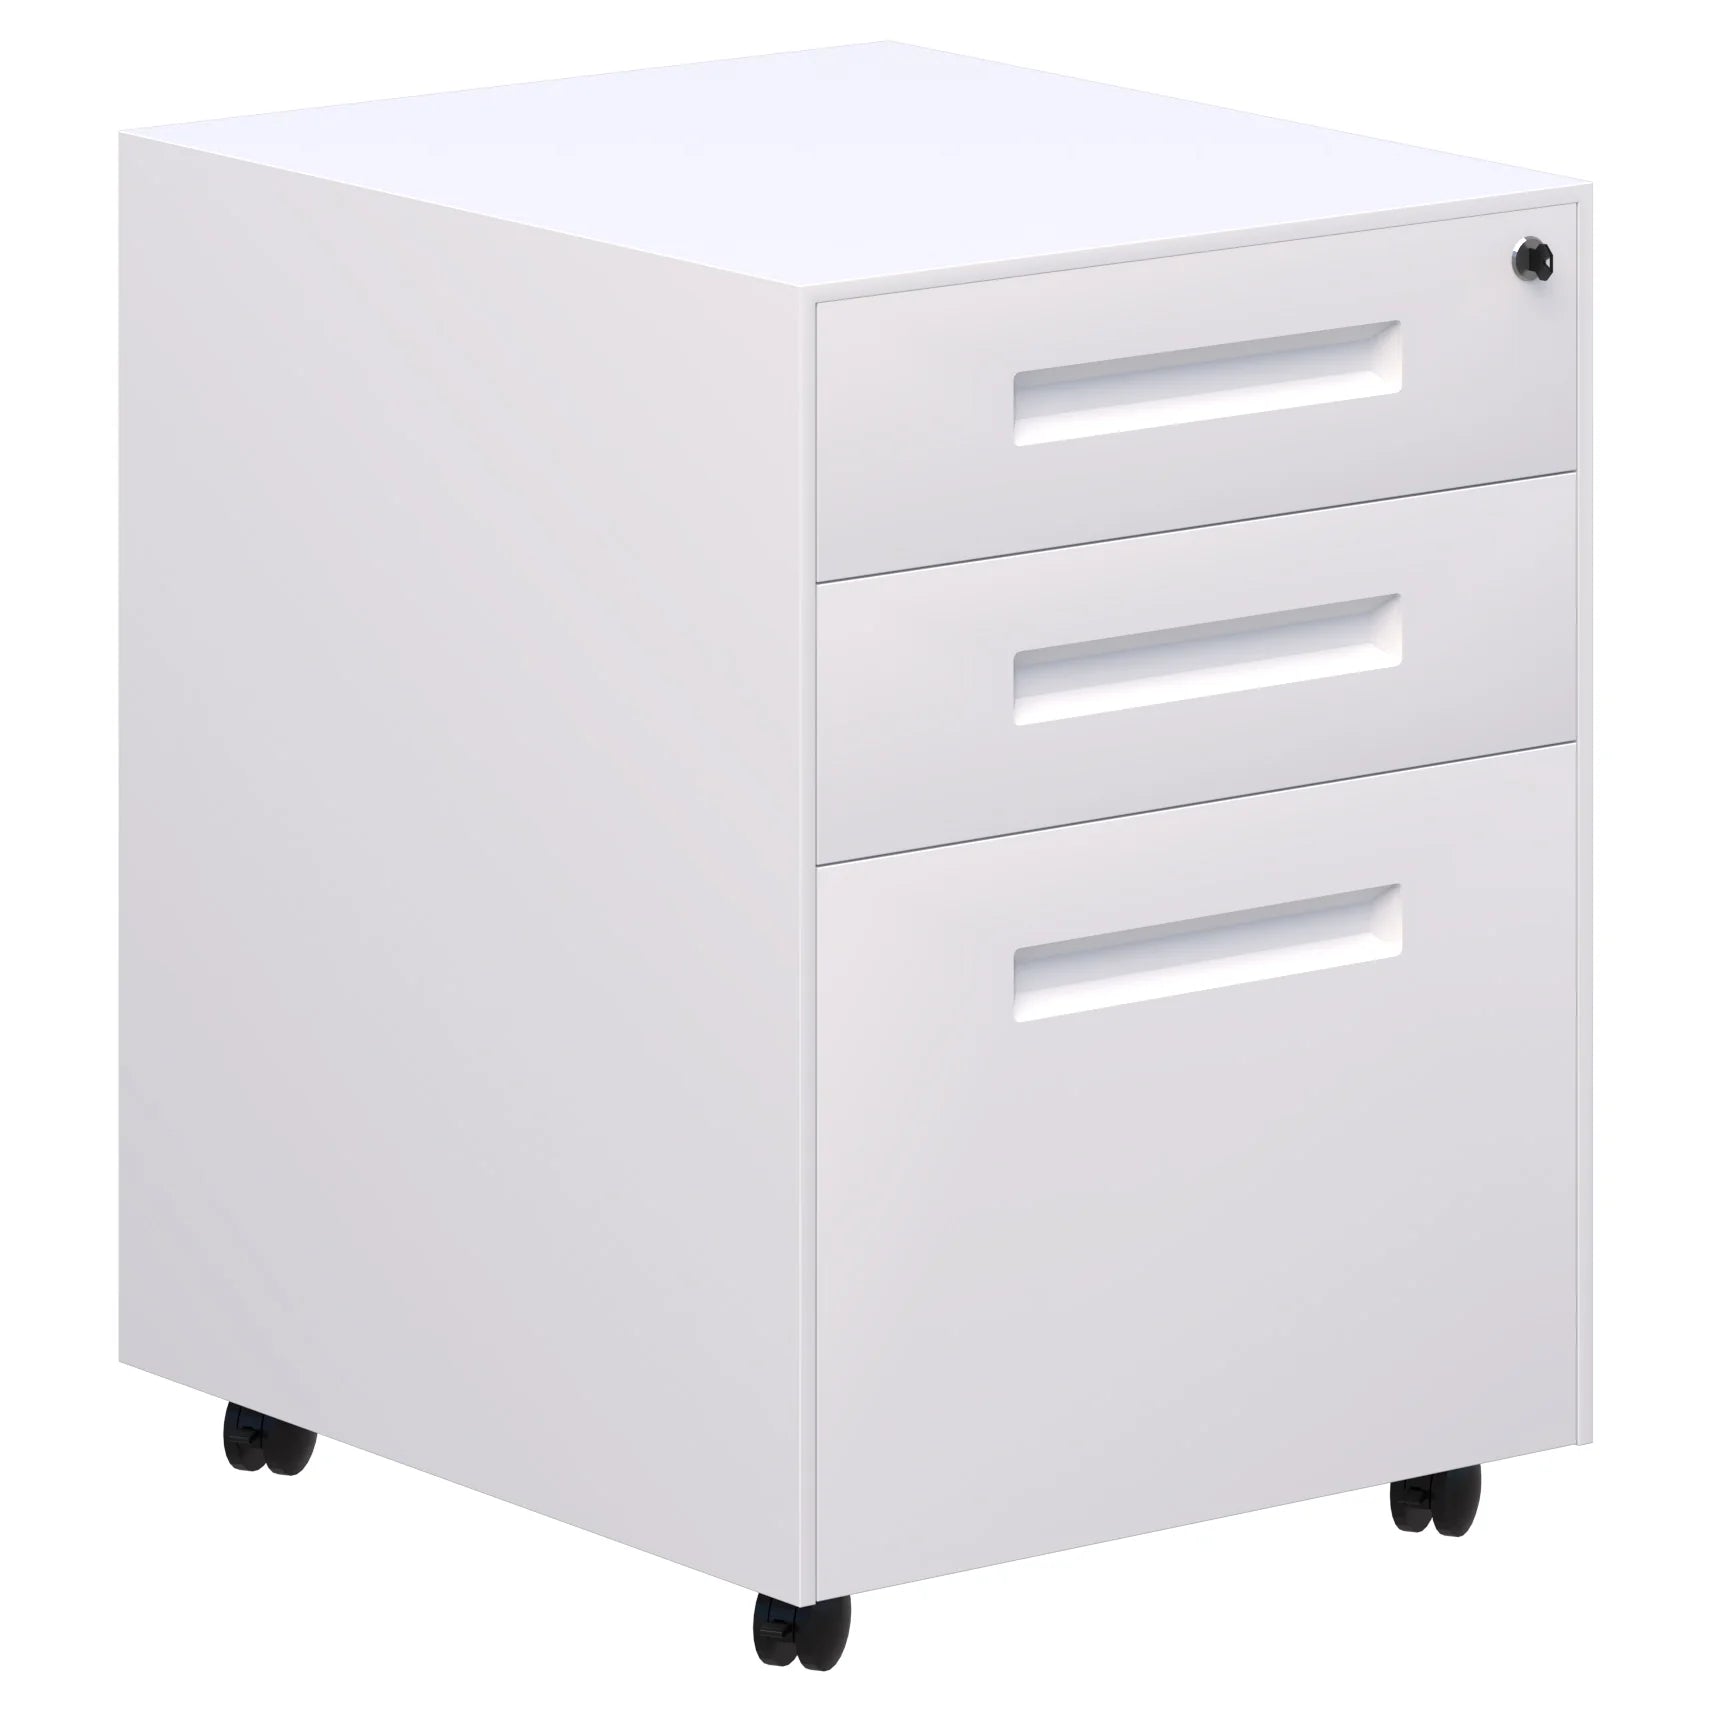 Lockable Spectrum metal mobile with two stationery drawers and 1 file draw in white with white handles.